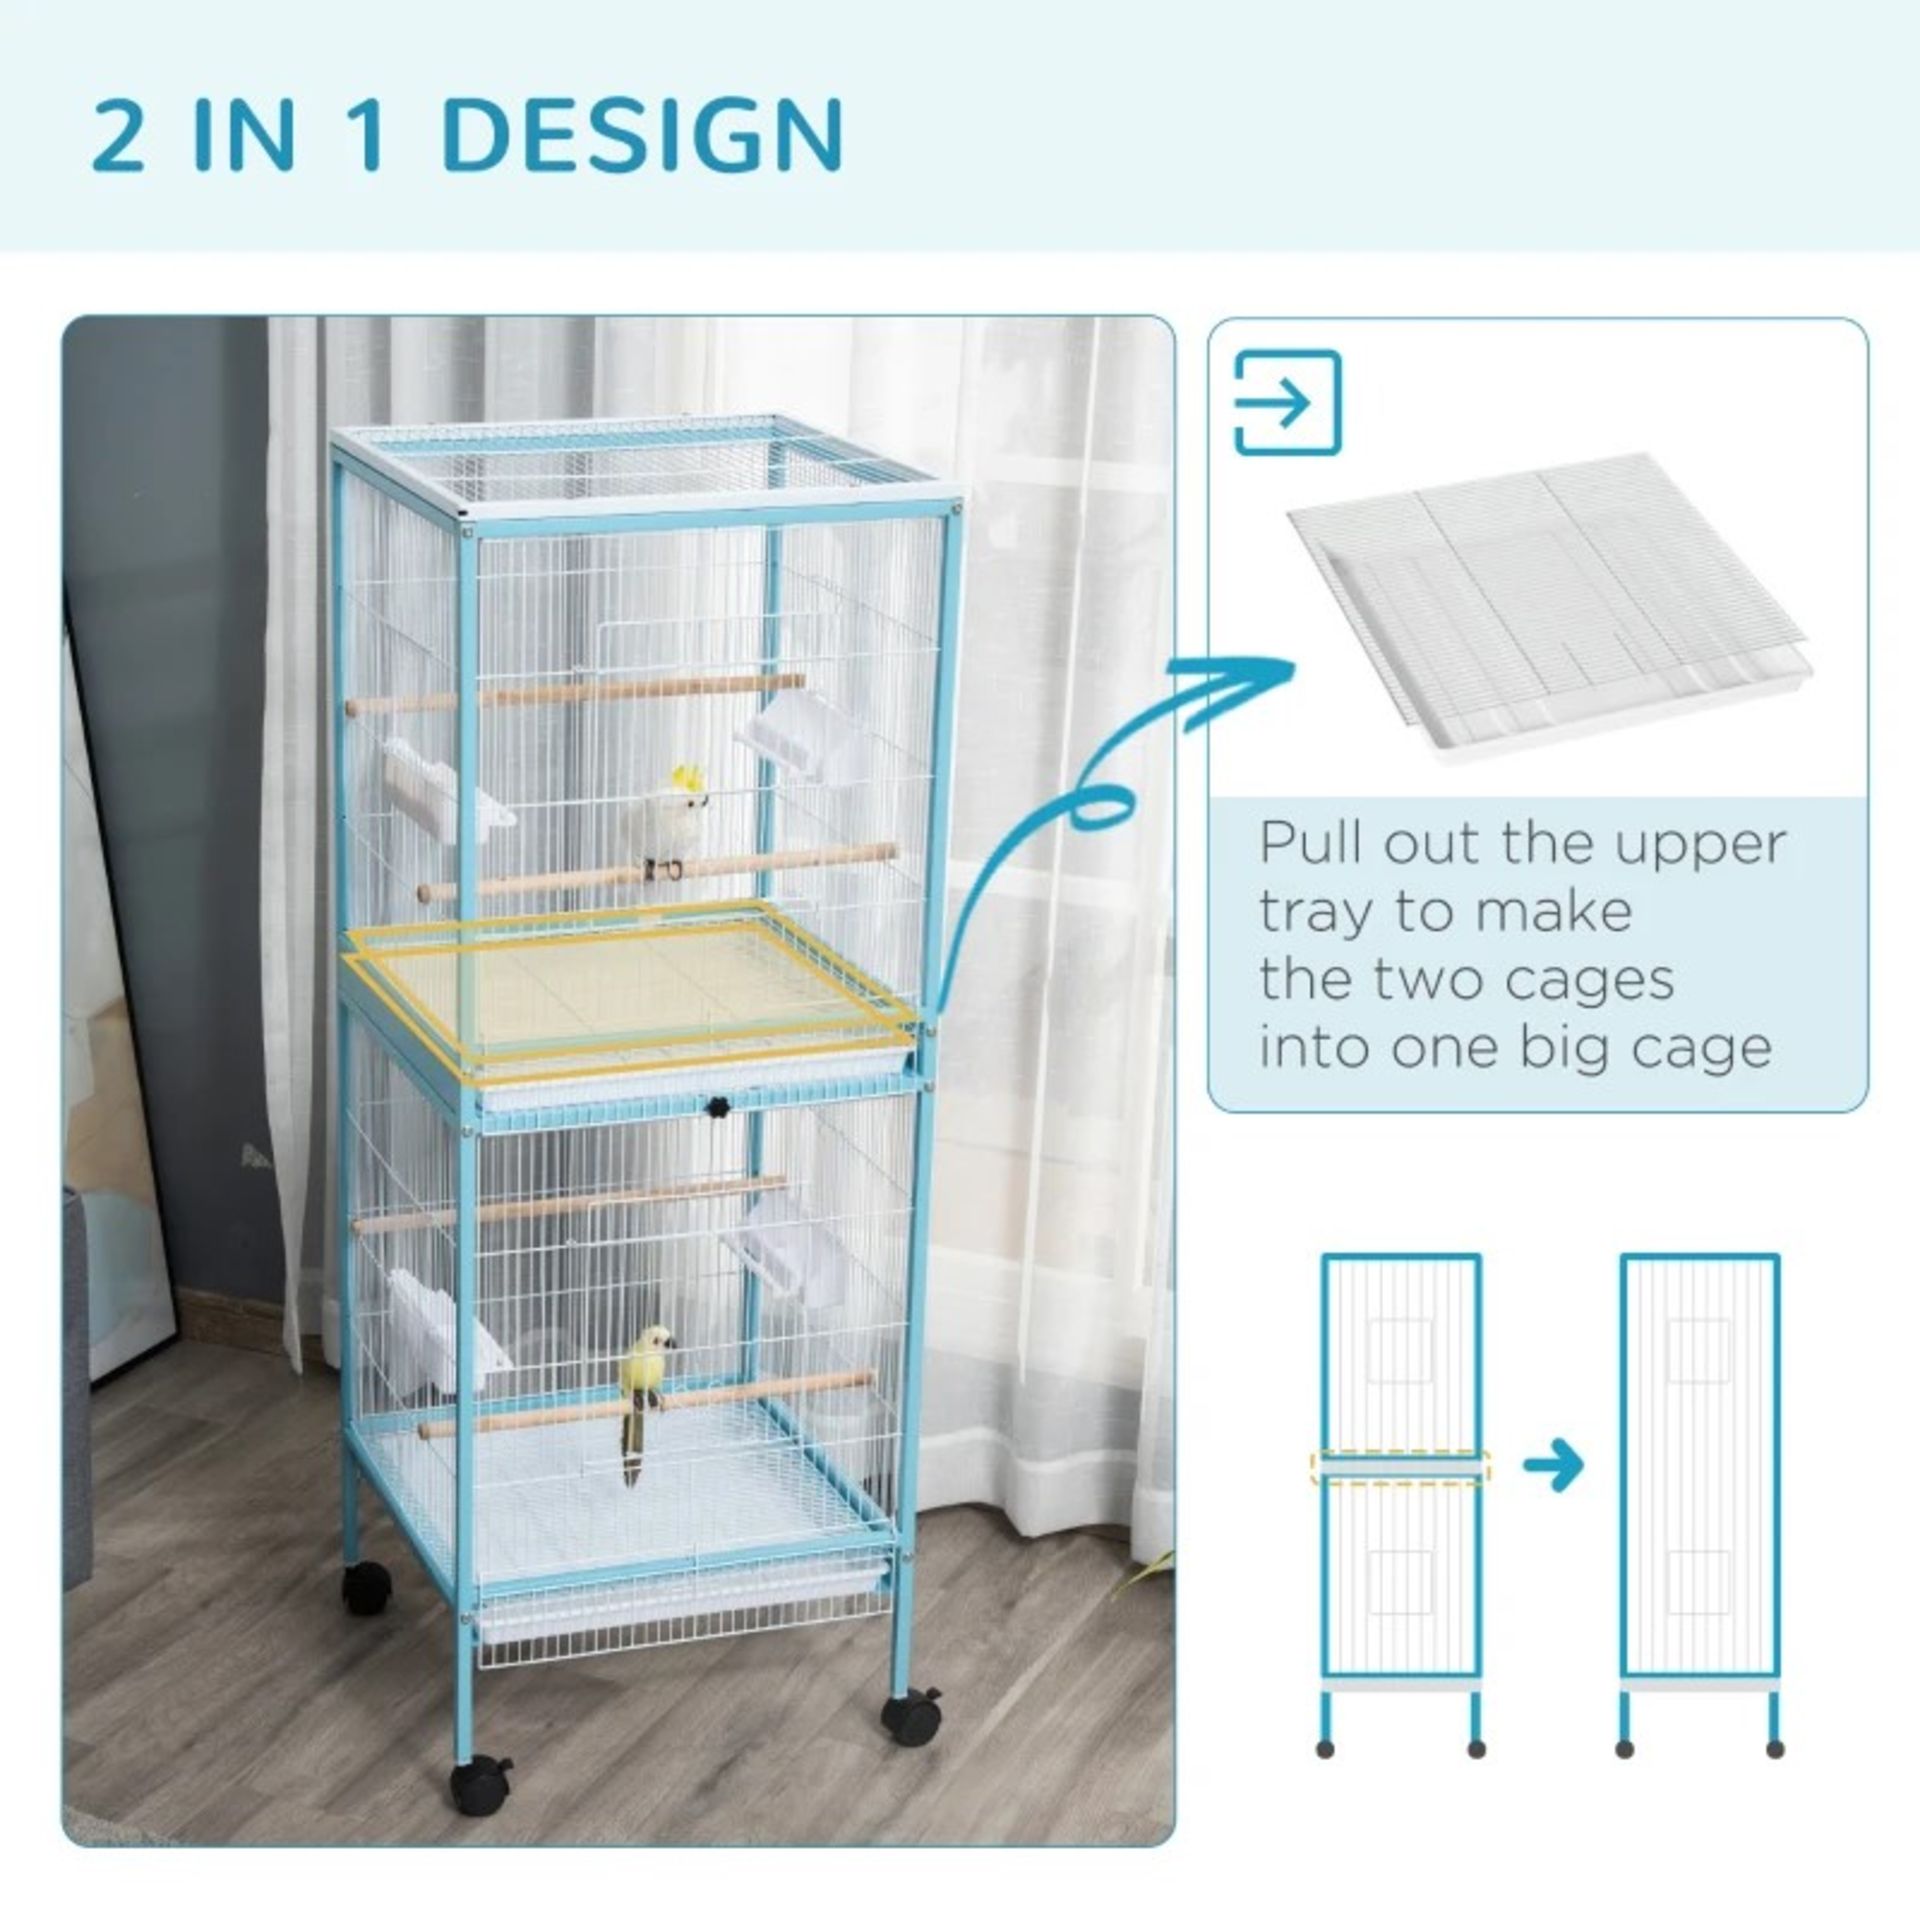 RRP £98.99 - PawHut 2 In 1 Large Bird Cage Aviary for Finch Canaries, Budgies with Wheels, Slide-out - Image 2 of 4